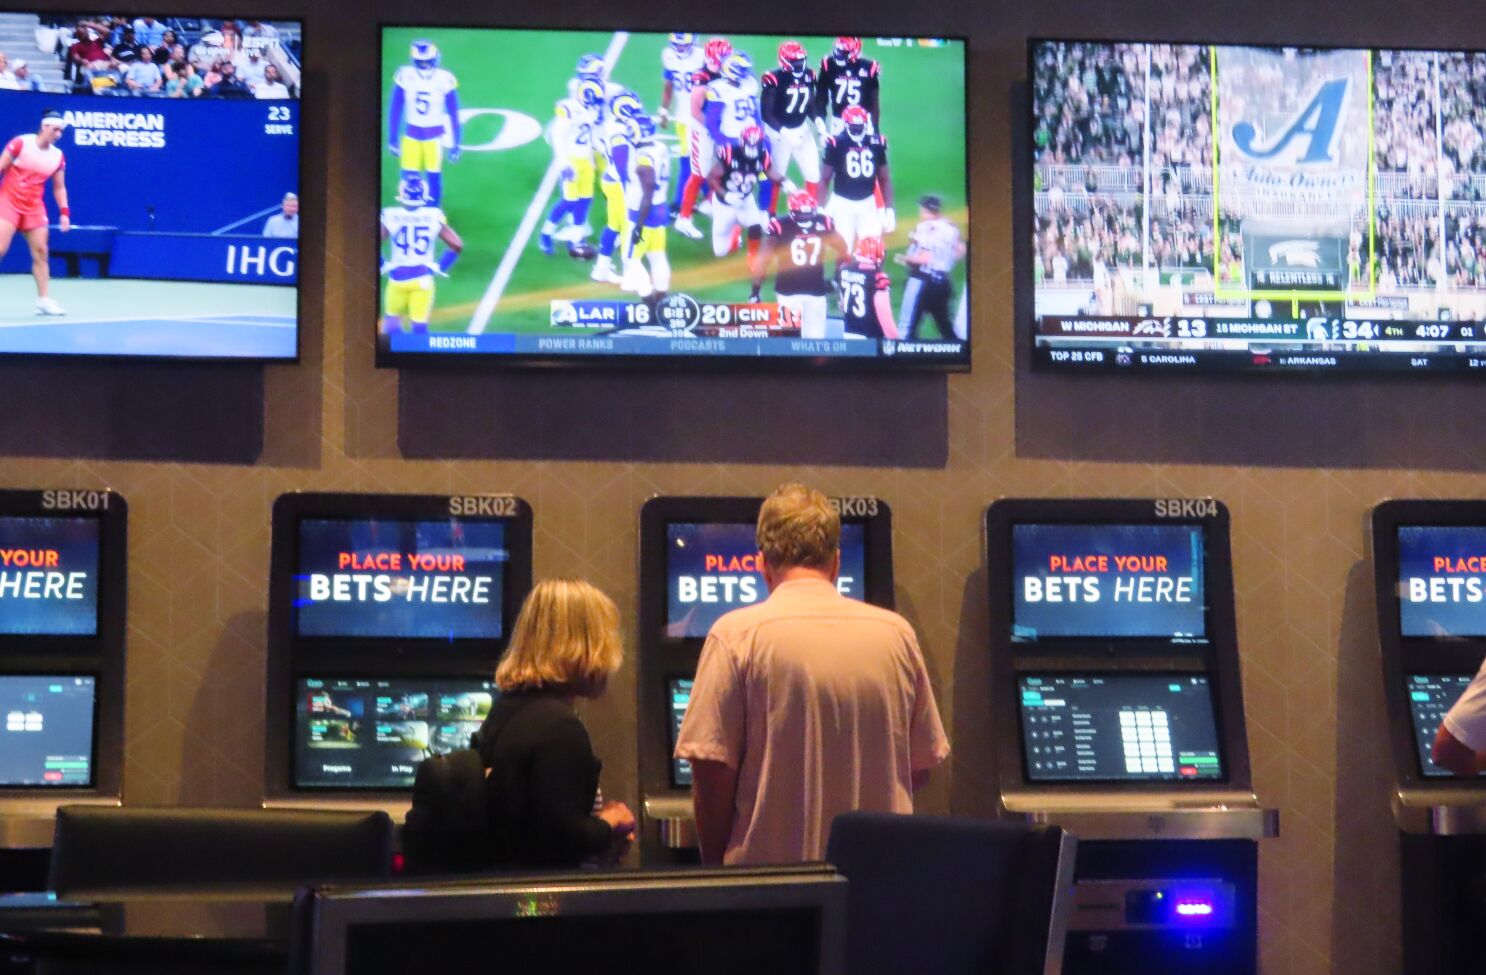 Addiction experts fear if California OKs sports betting - Los Angeles Times